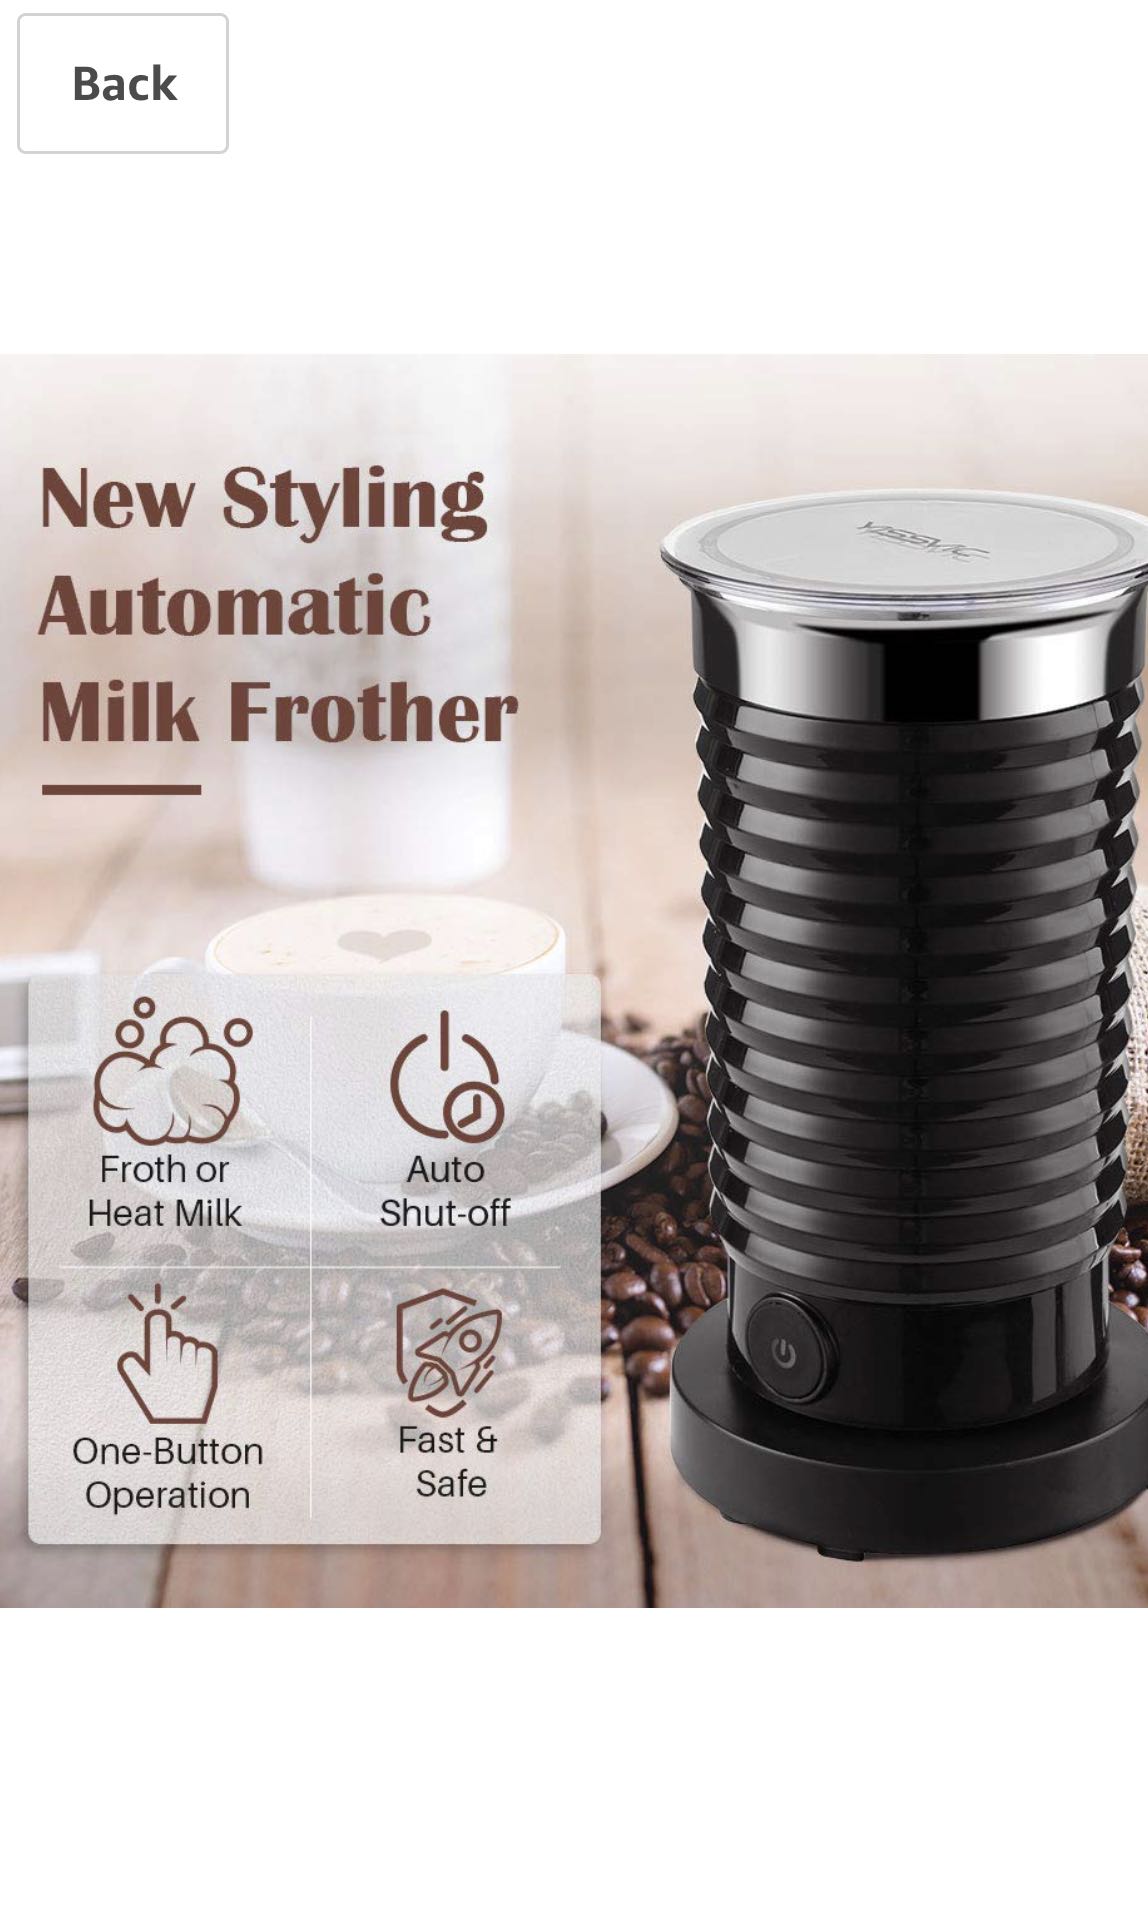 https://media.karousell.com/media/photos/products/2019/07/24/yissvic_milk_frother_electric_milk_steamer_and_warmer_with_two_whisks_auto_shut_off_for_cappuccino_l_1563978180_13ec3e06.jpg